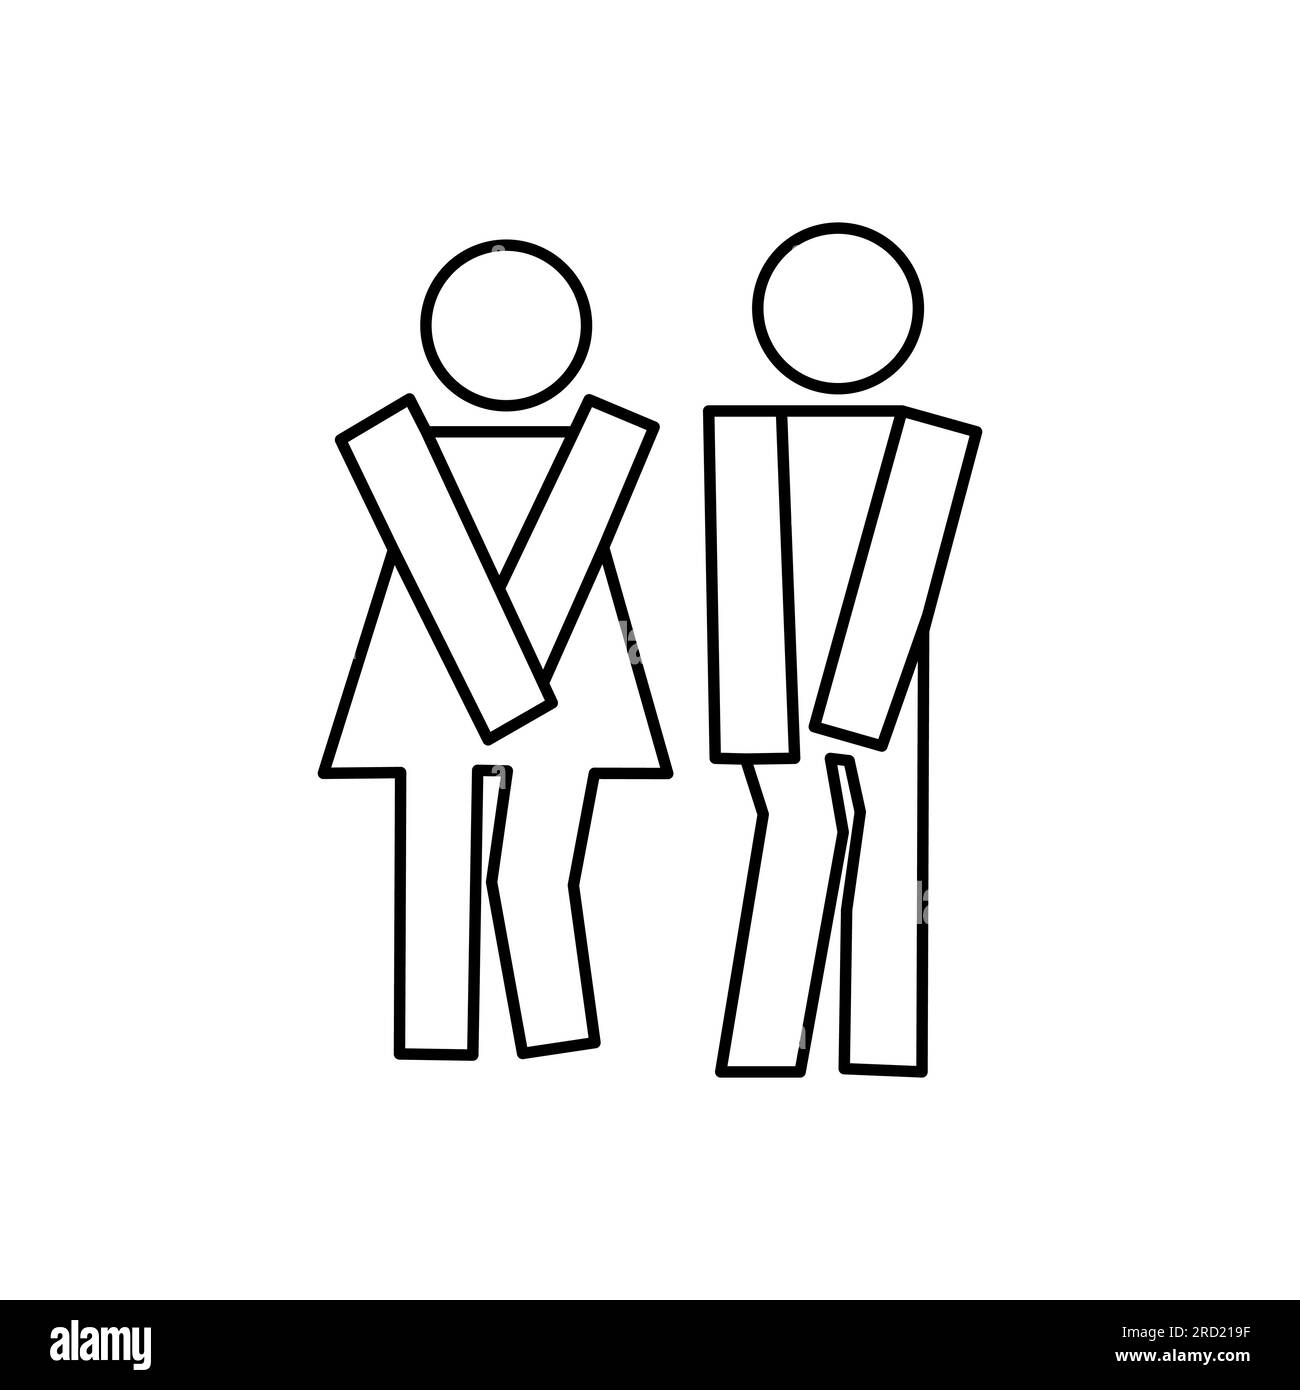 Wc toilet funny pictogram sign. Woman, man pictogram figure toilet, restroom, washroom wc sign. Stock Vector